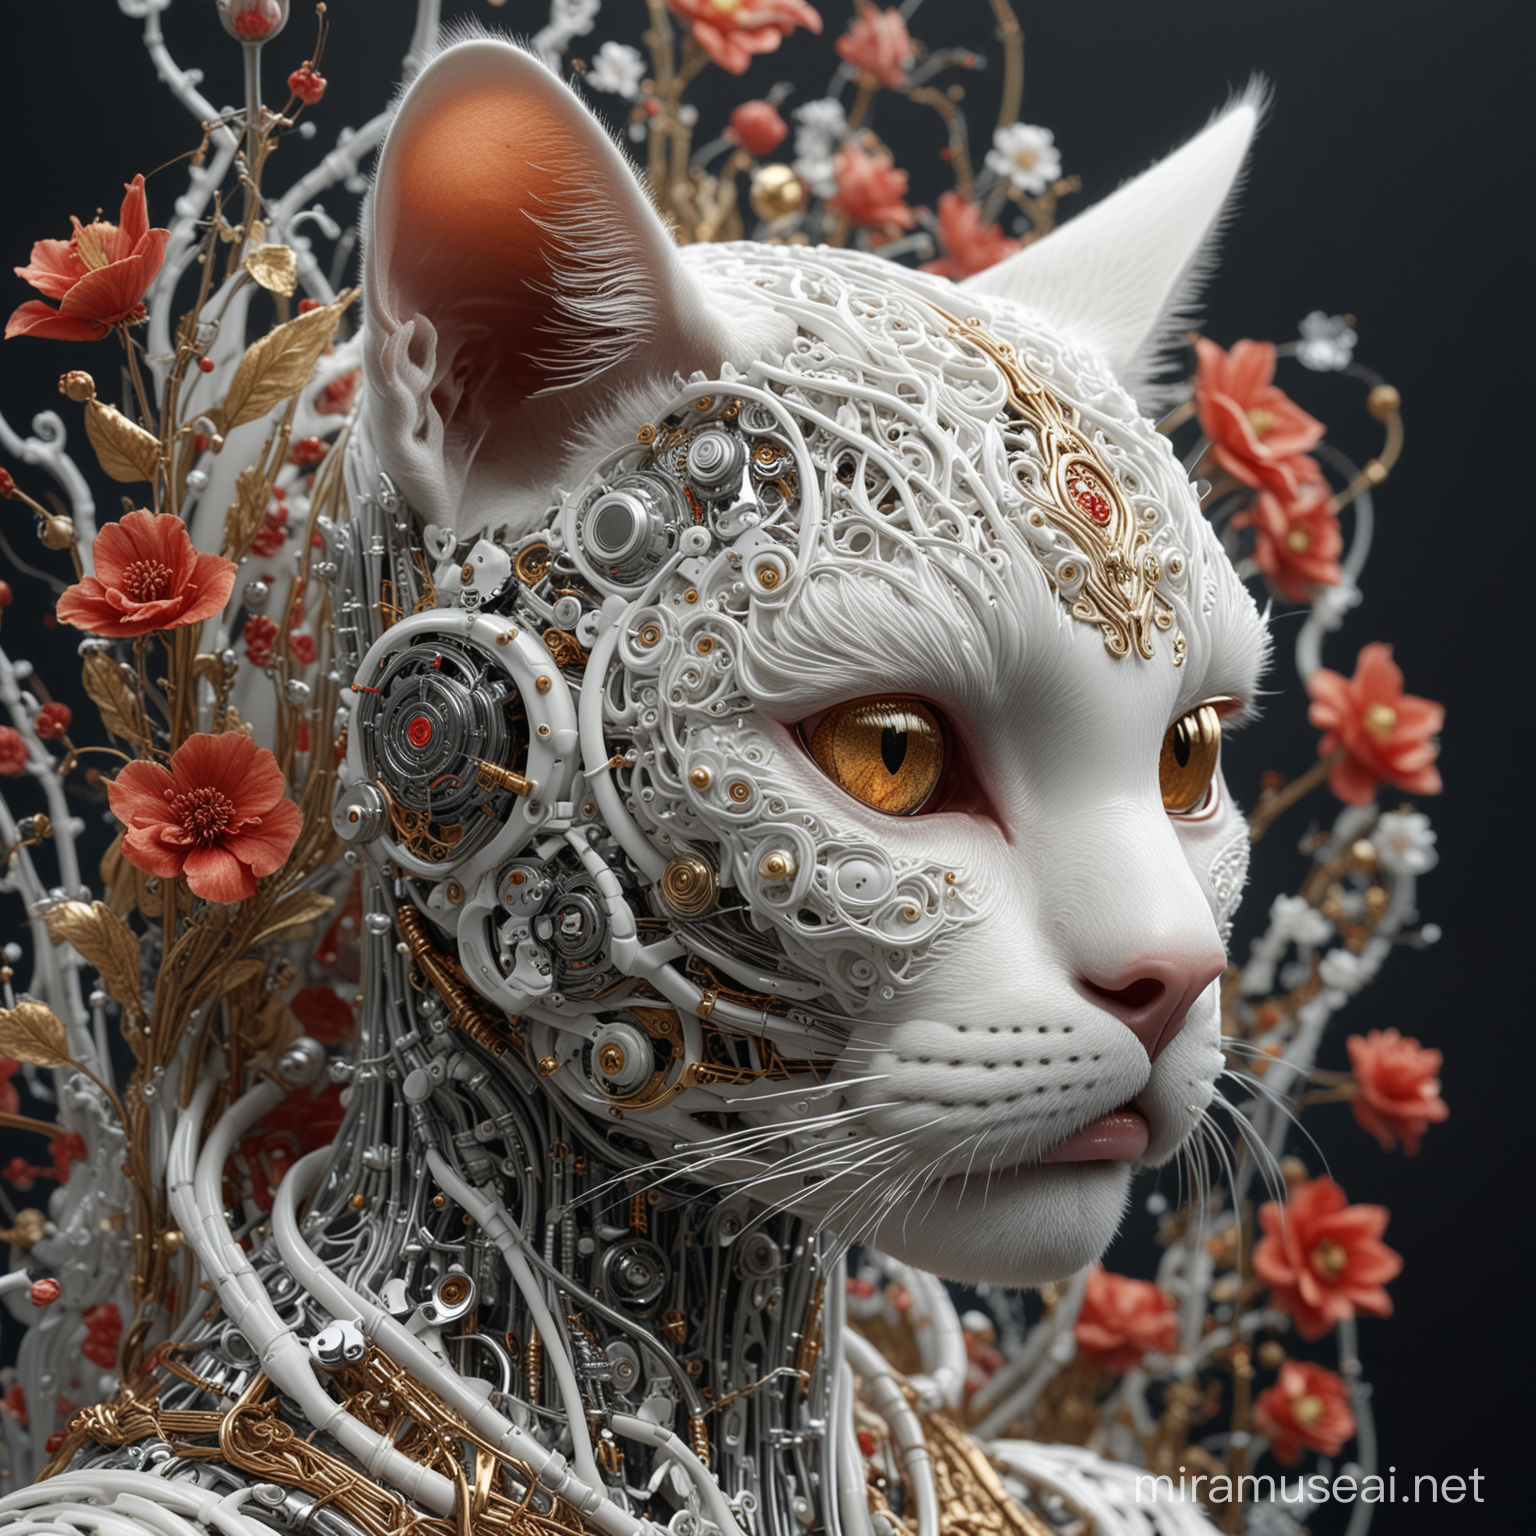 Exquisite Porcelain Cat Cyborg Portrait with Spring Floral Details and High Fashion Embellishments